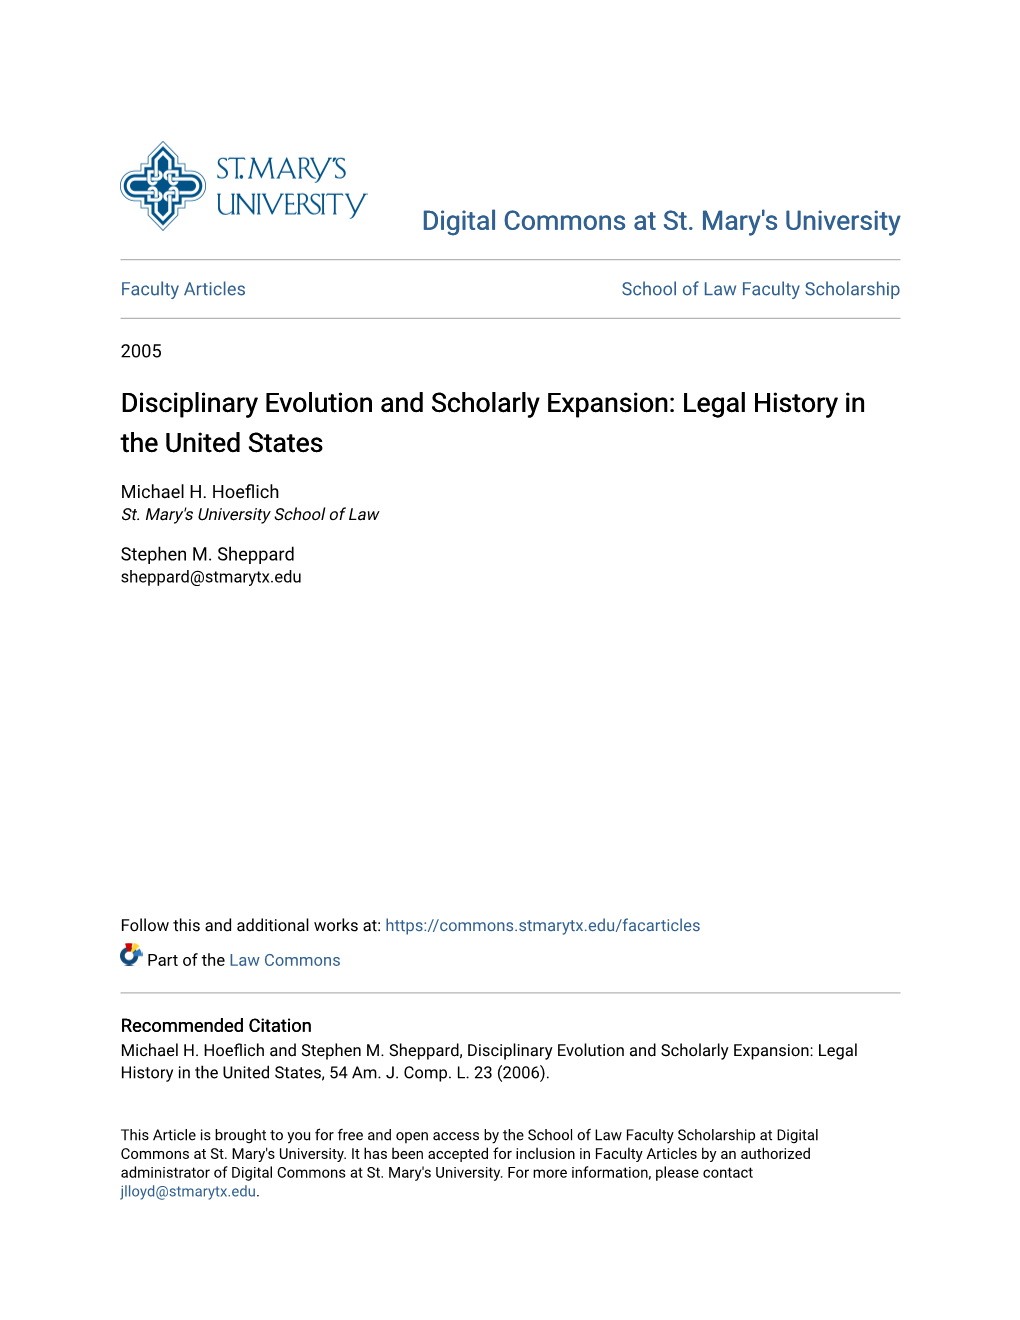 Disciplinary Evolution and Scholarly Expansion: Legal History in the United States